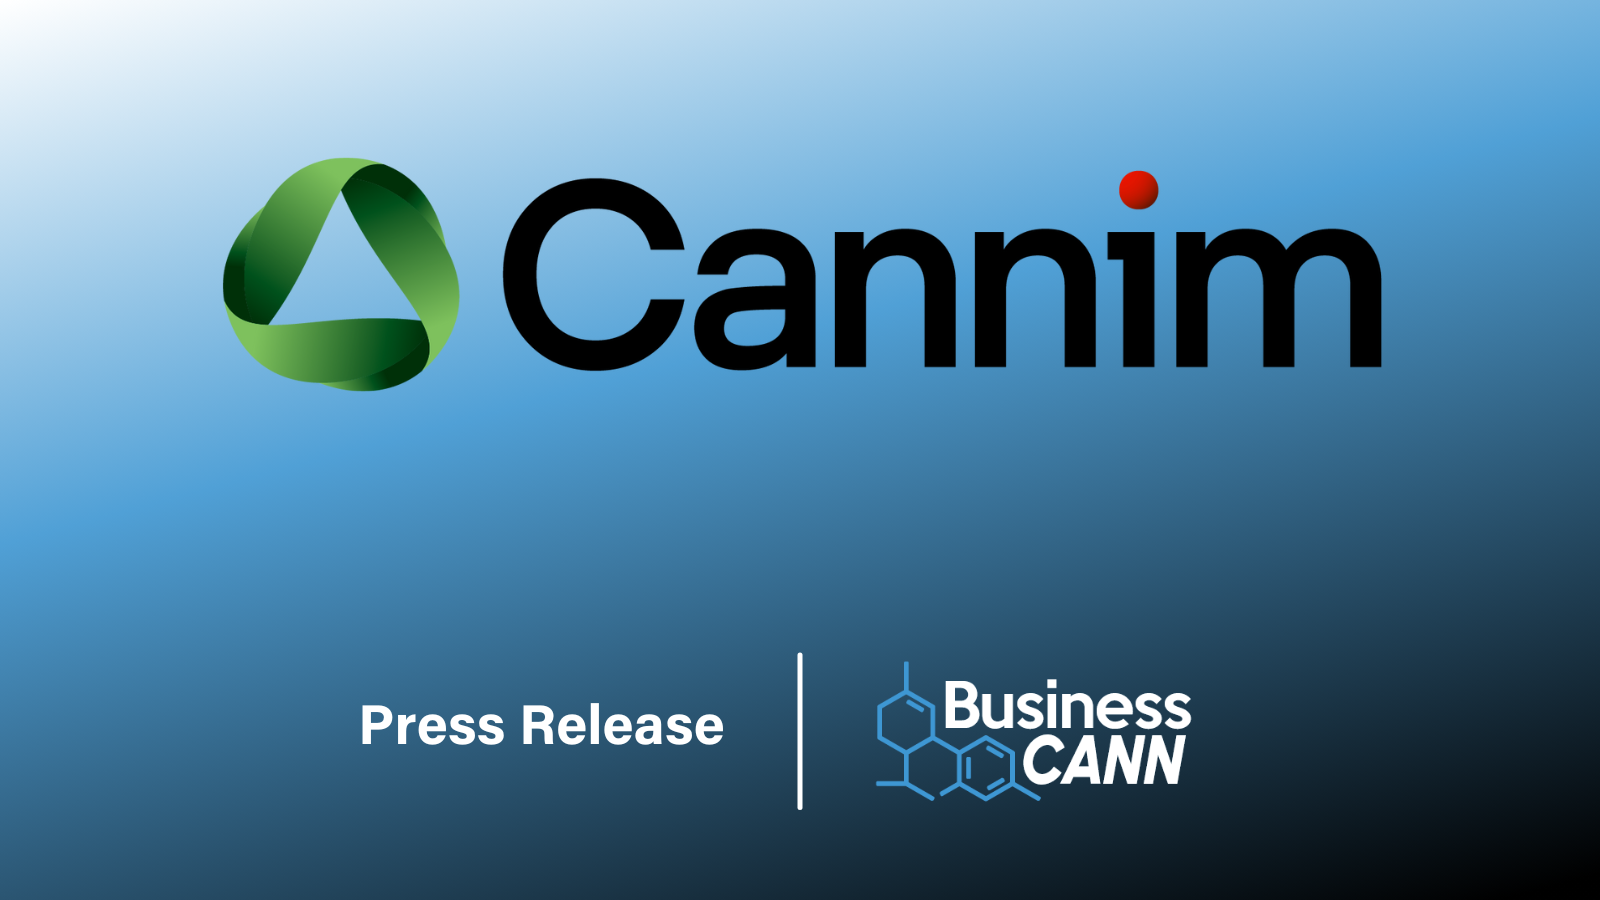 CANNIM has today announced a world first as it releases its Jamaican grown medical cannabis for patients in the UK. This is the first legal shipment of medical cannabis to reach the UK from Jamaica and follows on from successful legal imports into Australia and Germany.